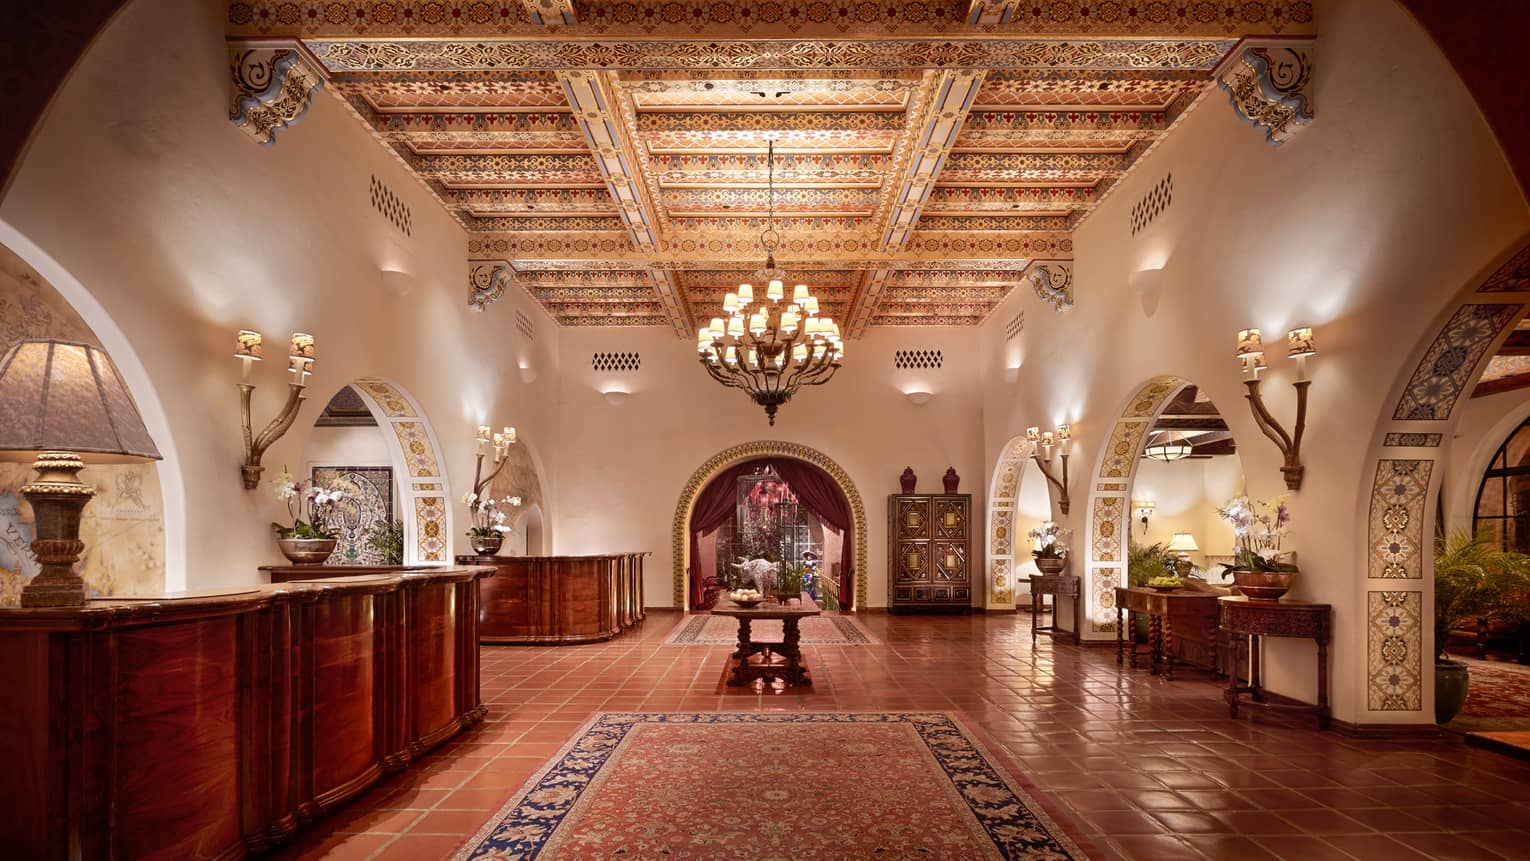 Colourful Spanish tiles covering ceiling, beams above chandelier, area rug, hotel lobby